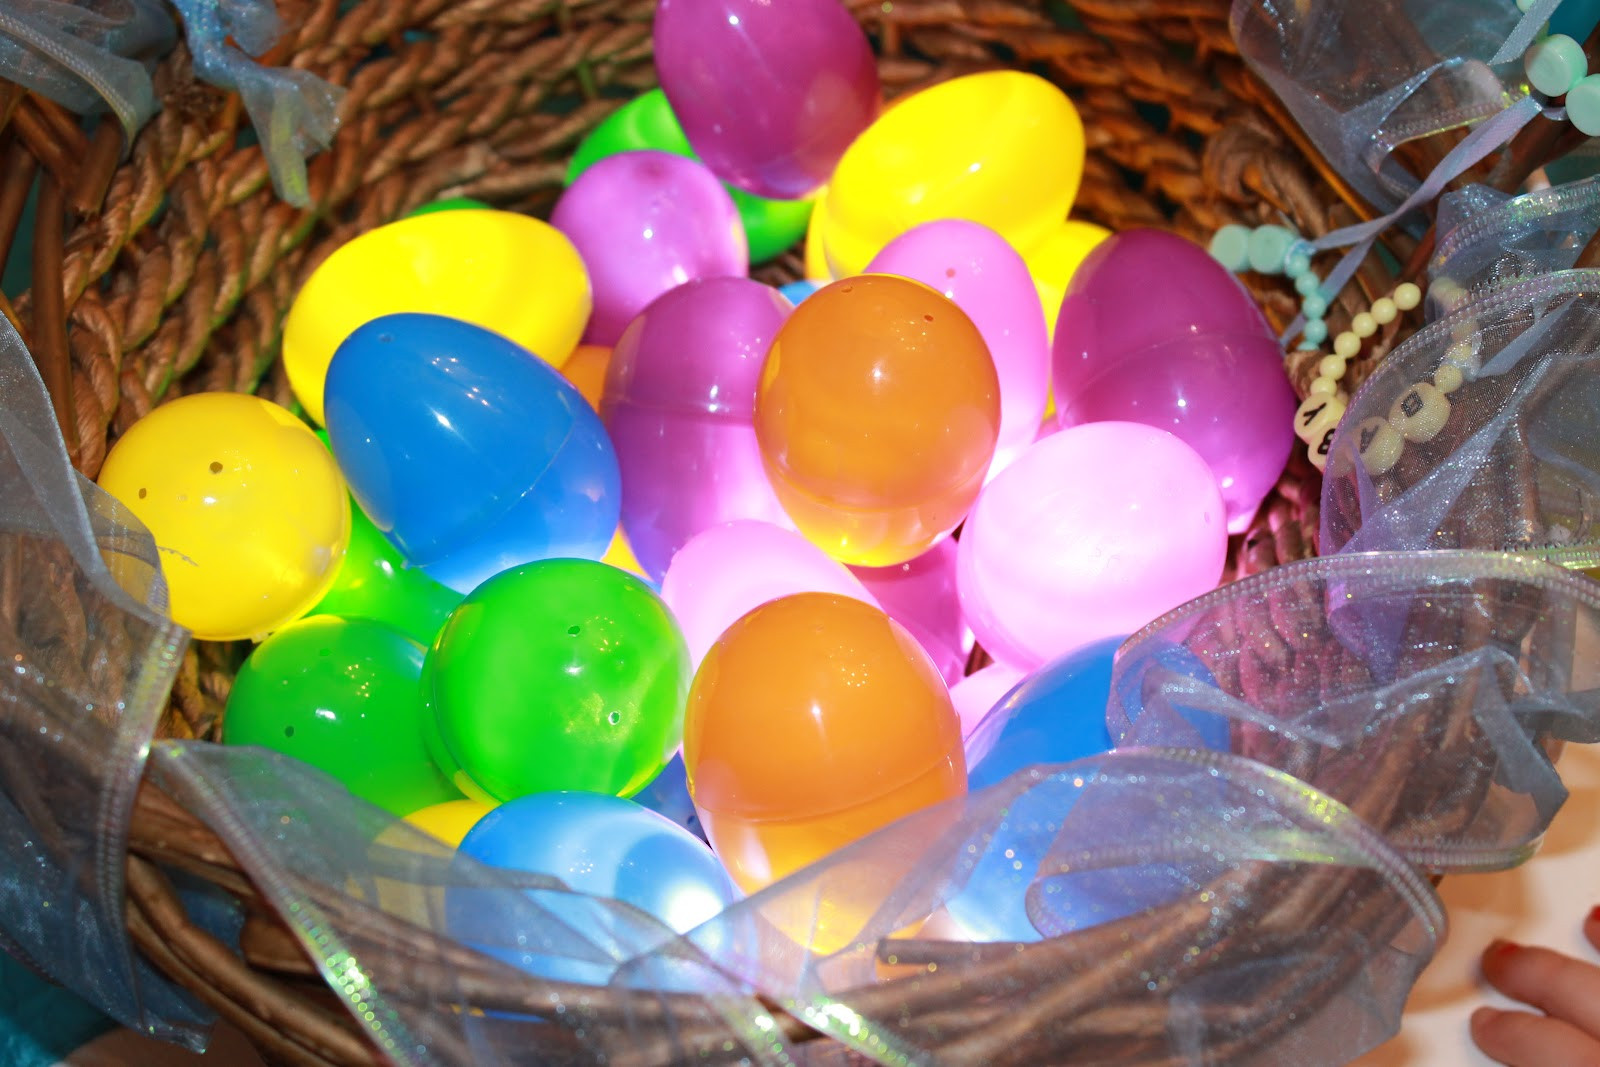 Glow In The Dark Easter Egg Hunt Ideas
 5 Fun Adult Easter Egg Hunt Ideas